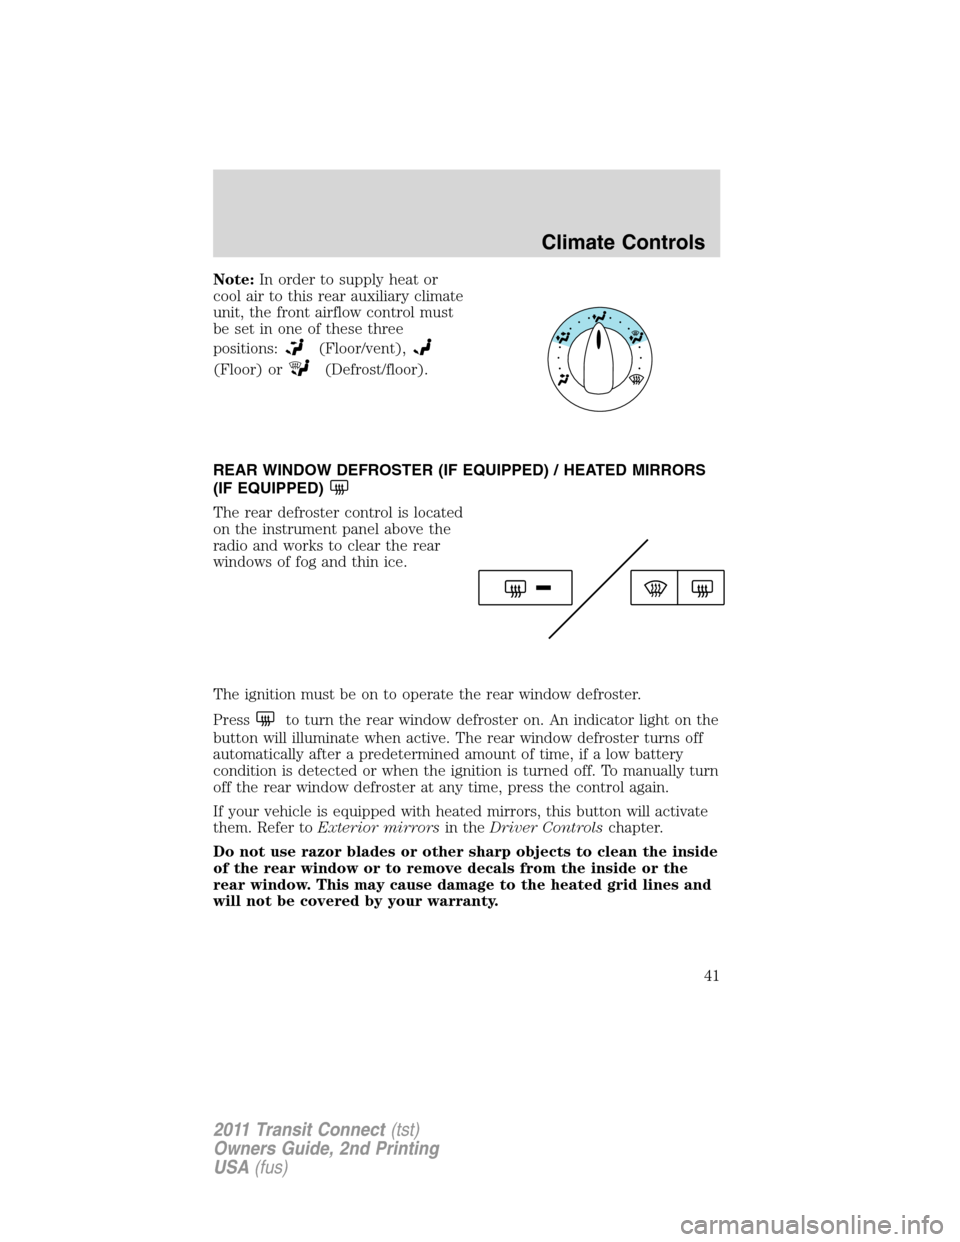 FORD TRANSIT CONNECT 2011 1.G Service Manual Note:In order to supply heat or
cool air to this rear auxiliary climate
unit, the front airflow control must
be set in one of these three
positions:
(Floor/vent),
(Floor) or(Defrost/floor).
REAR WINDO